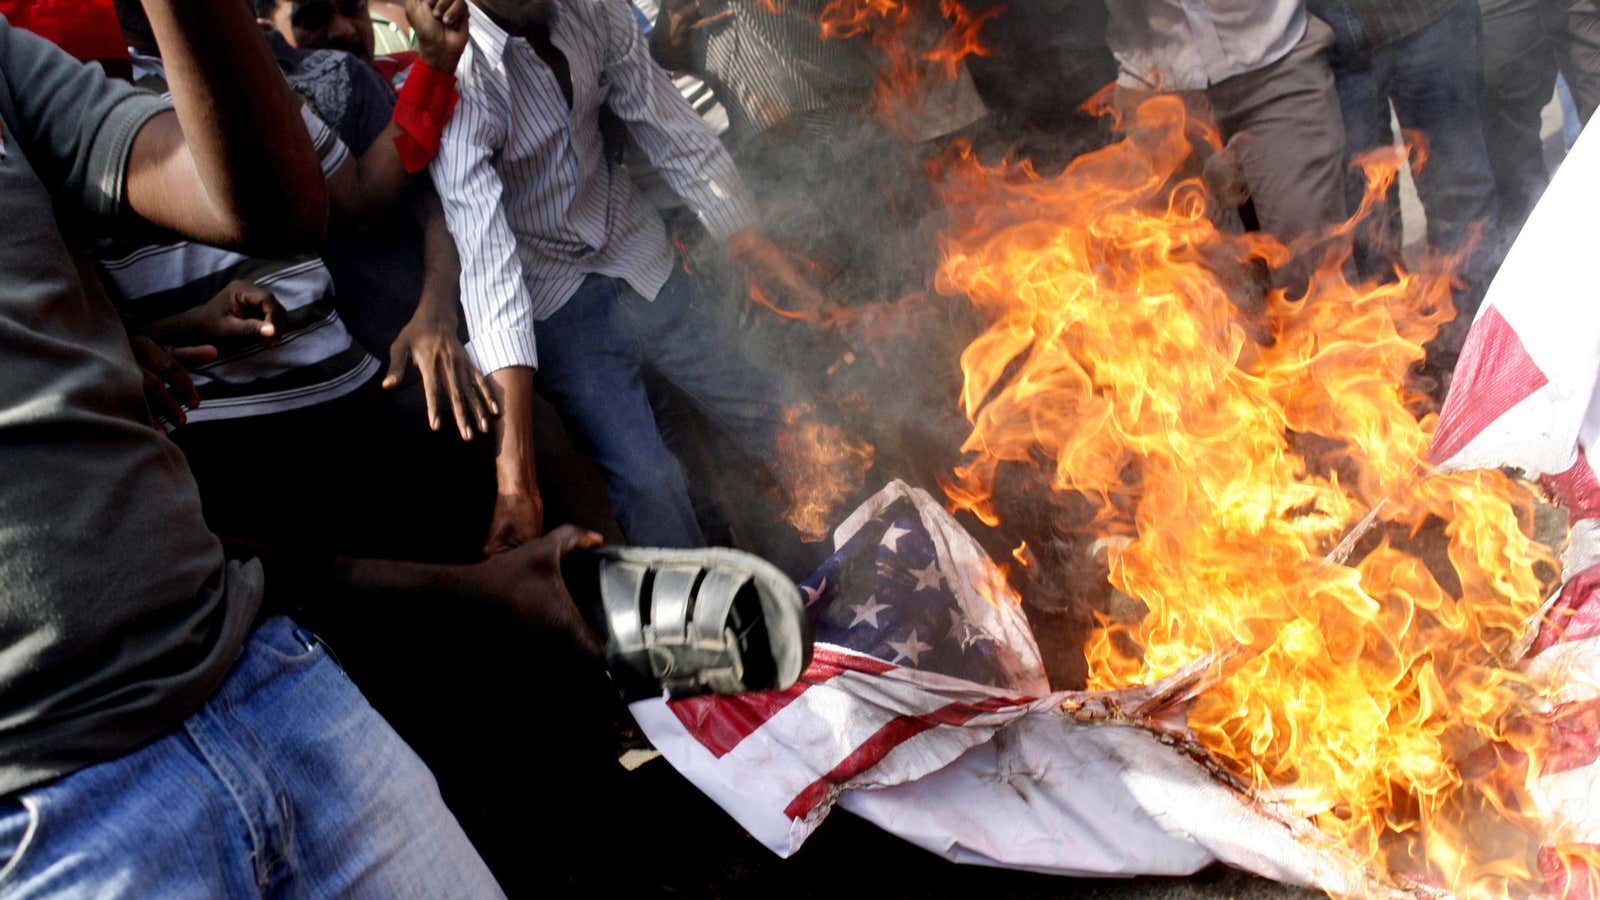 Indians are burning flags in protest of a diplomat’s recent arrest.